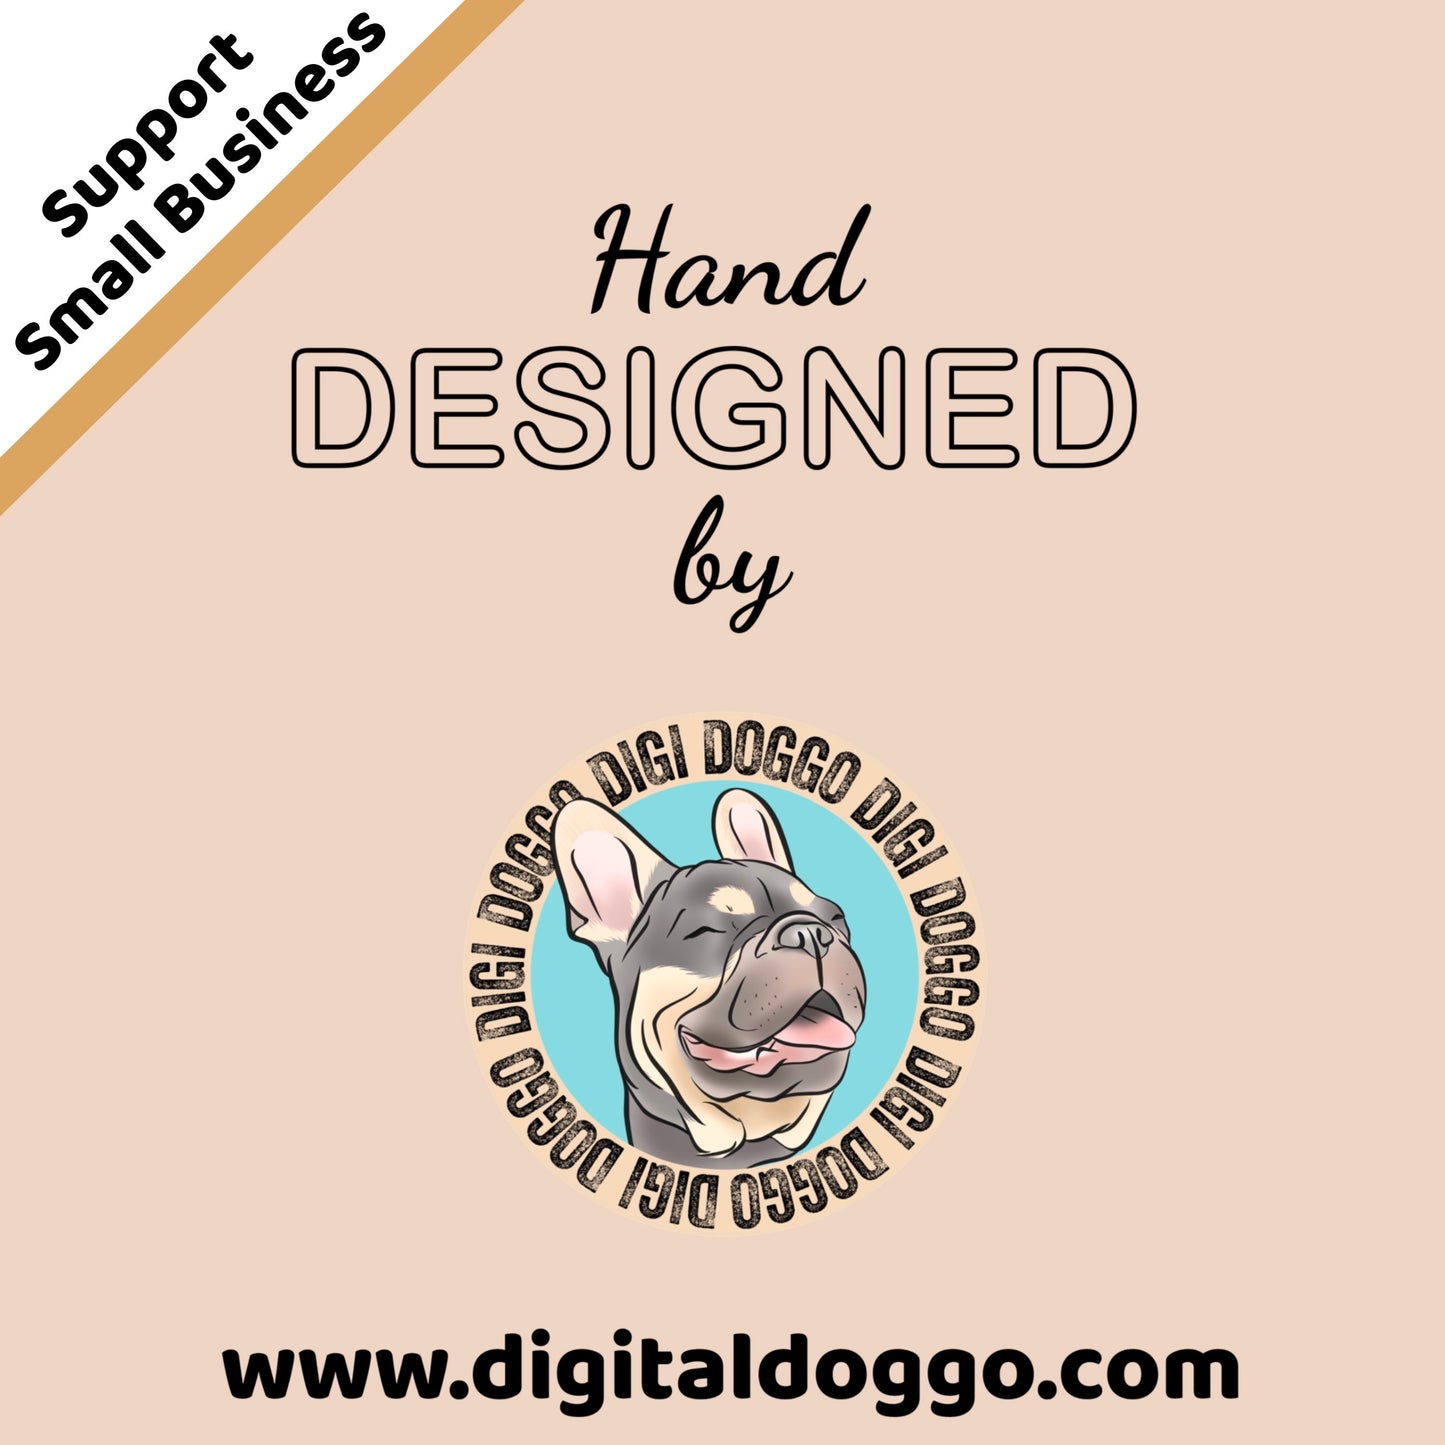 Dalmatian Face Phone Case/ Personalised Dalmatian Portrait Phone Case/ Adorable Dog Phone Accessory/ Stylish Dog Phone Cover/ Memorial Gift